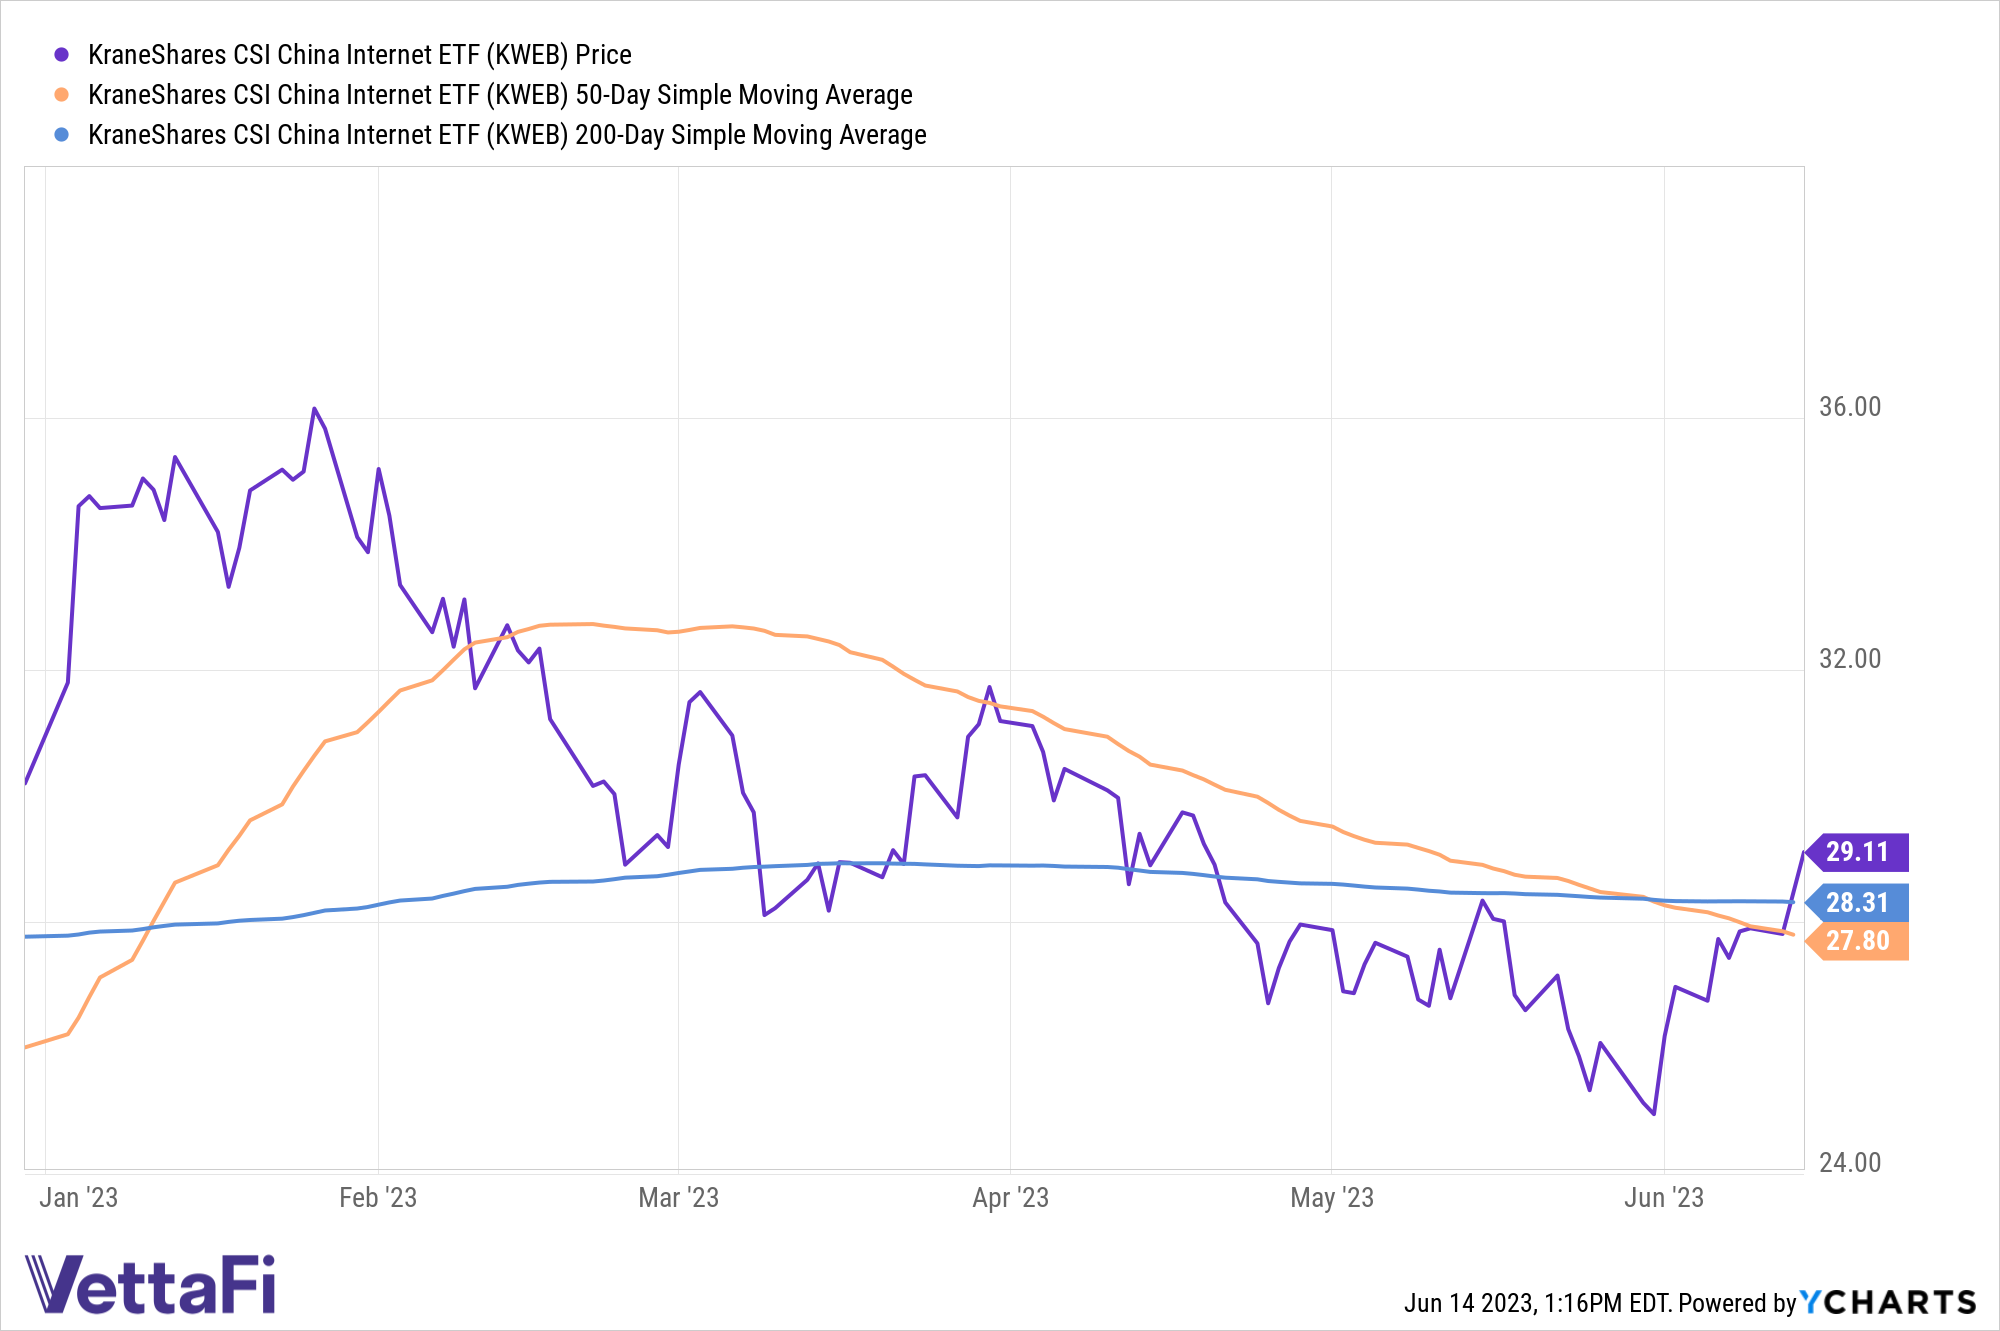 Price chart of KWEB currently at 29.11 compared to its 50-day SMA of 27.80 and 200-day SMA of 28.31.